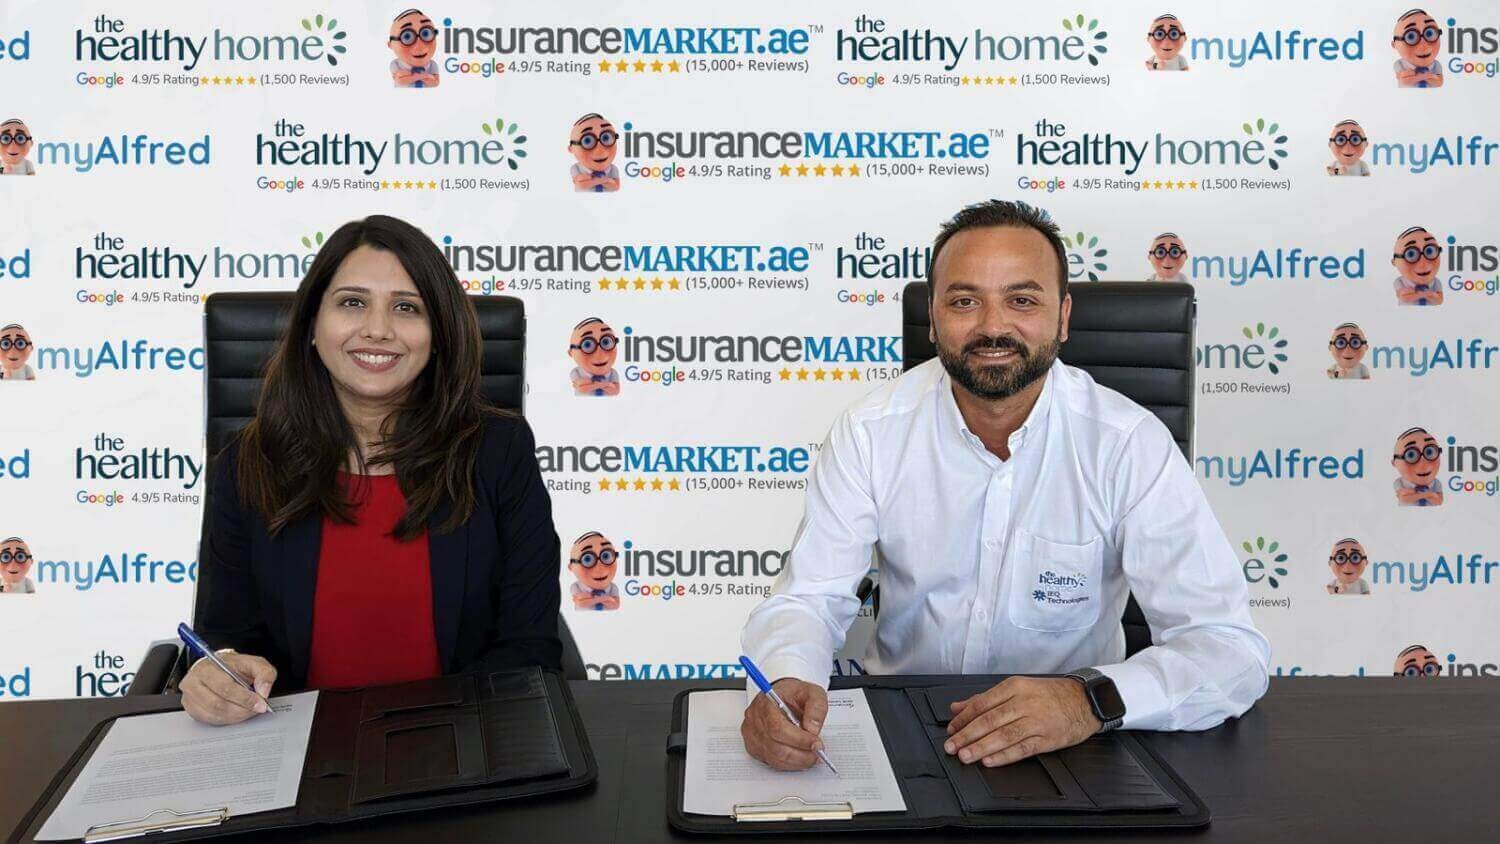 InsuranceMarket.ae and Healthy Home team up to provide health and home wellness